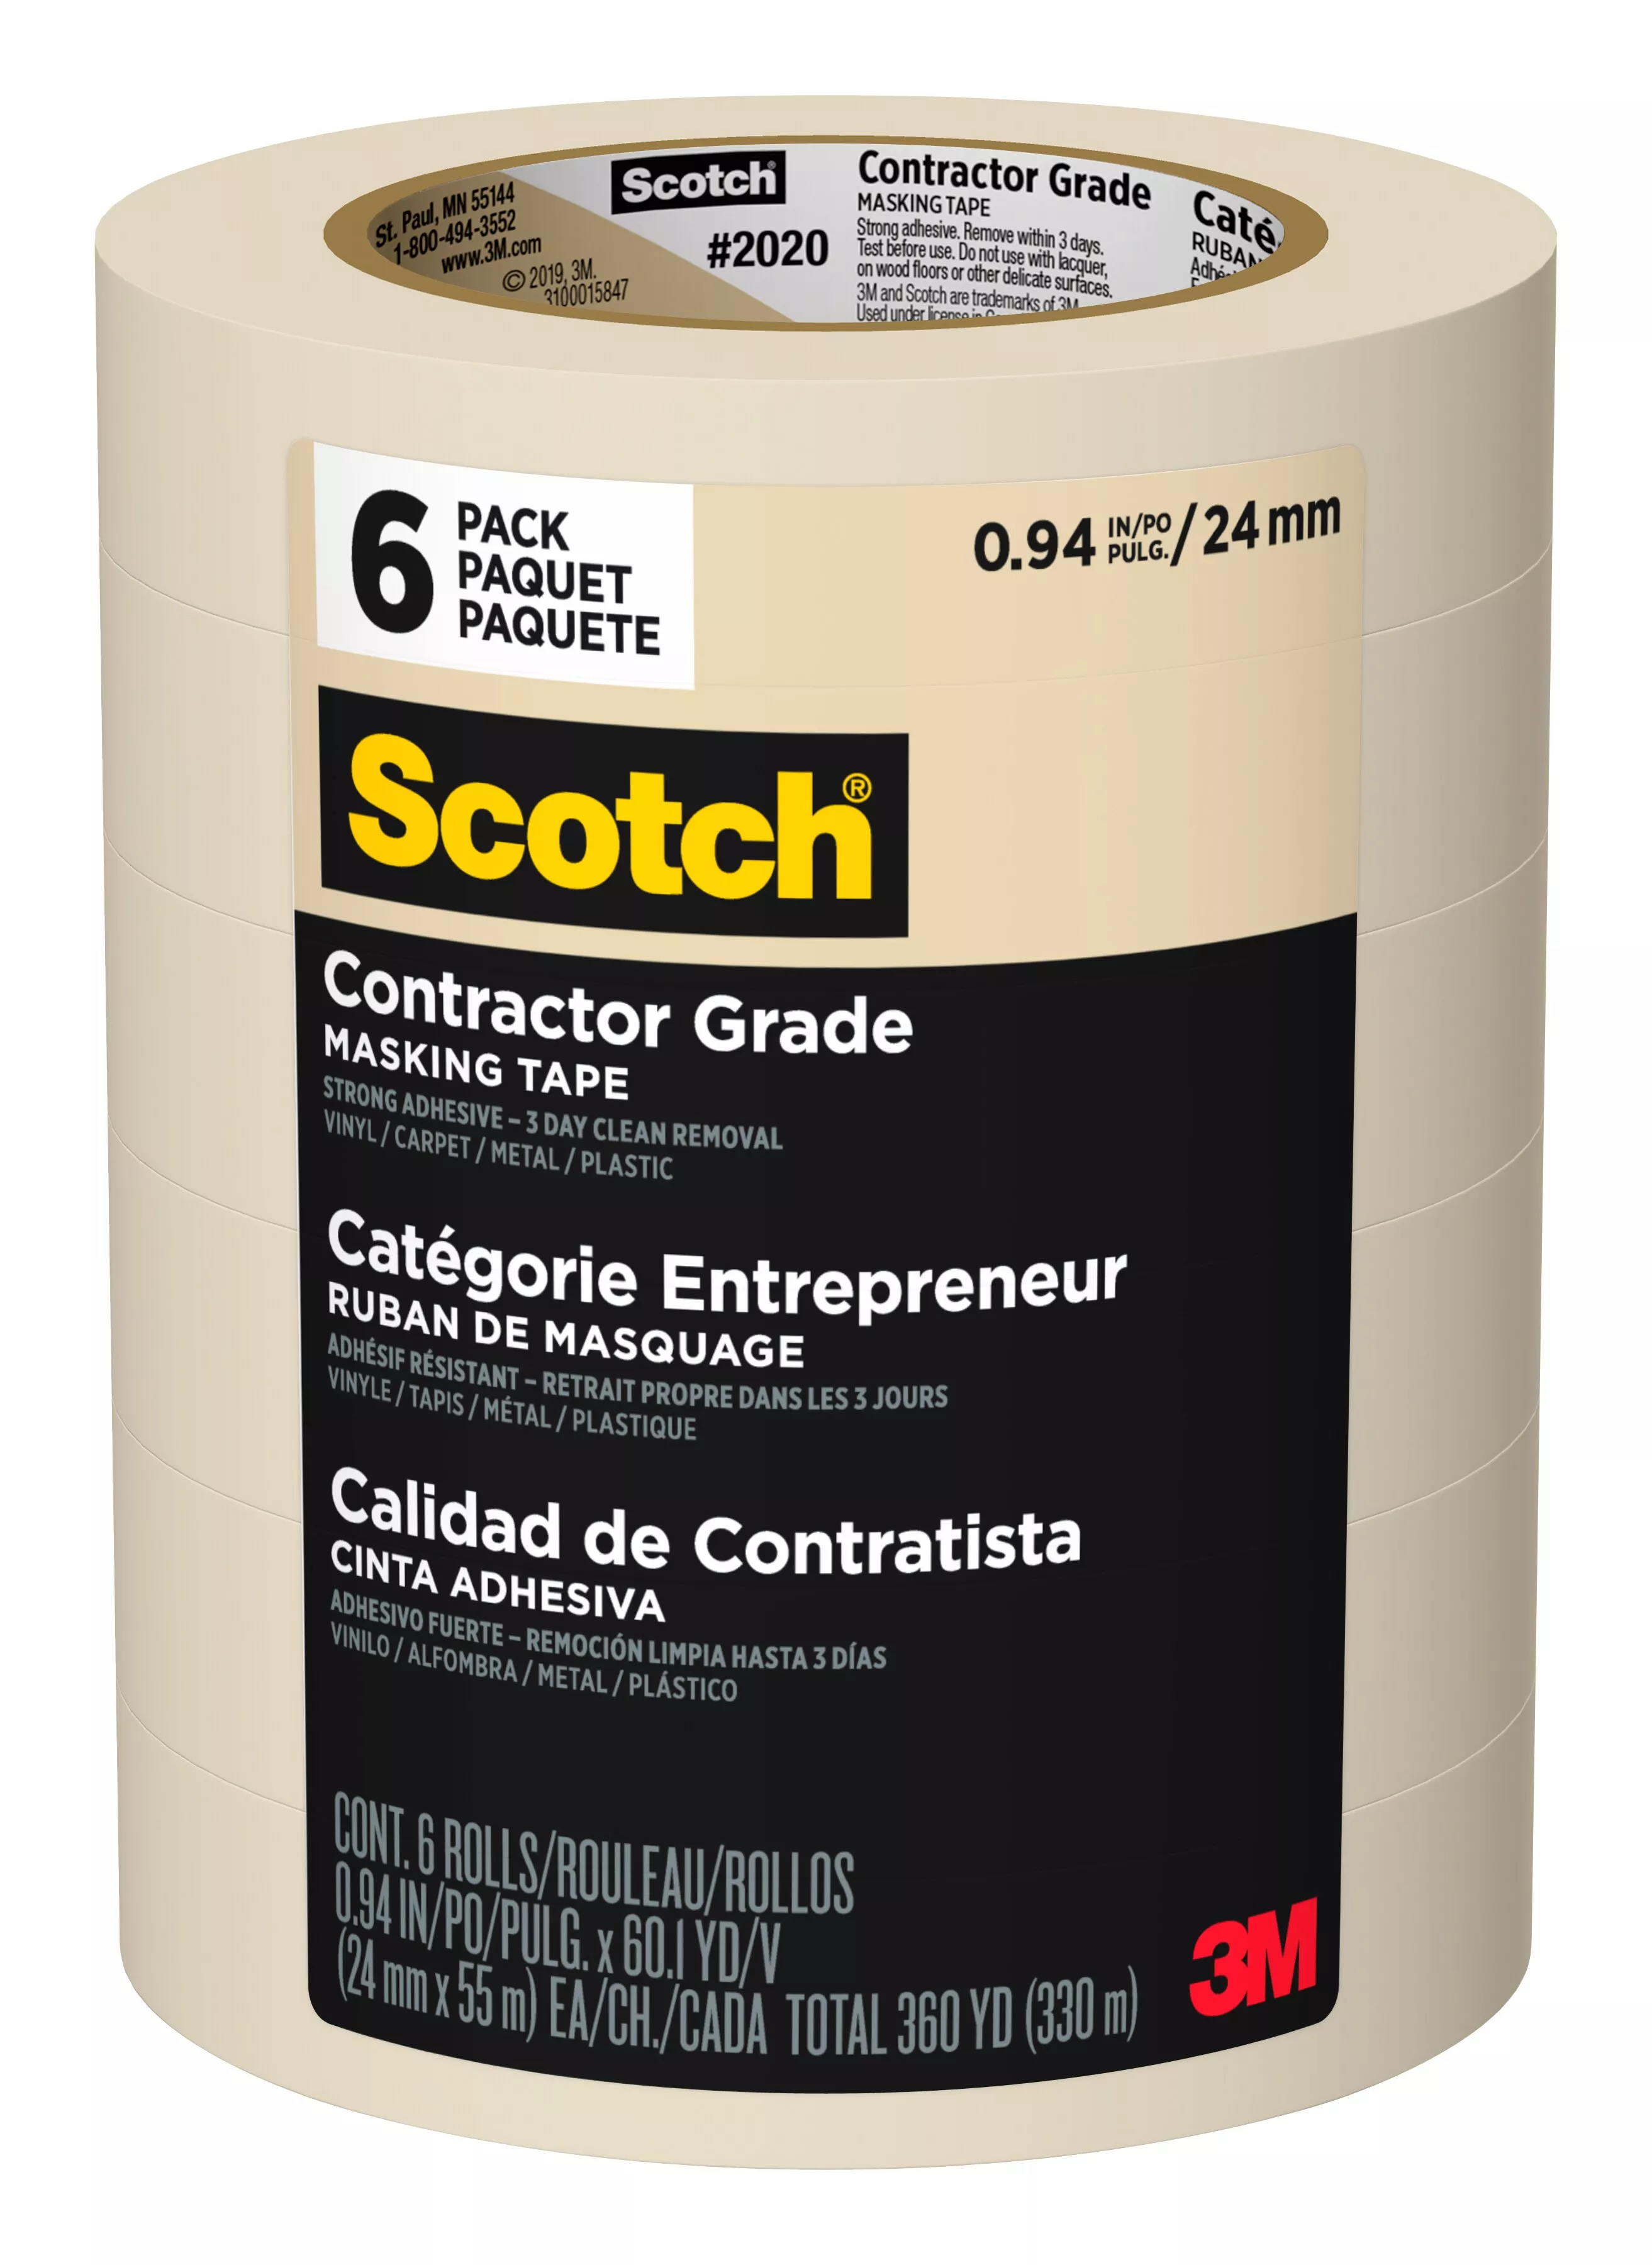 Scotch® Contractor Grade Masking Tape 2020-24EP6, 0.94 in x 60.1 yd (24mm x 55m), 6 rolls/pack